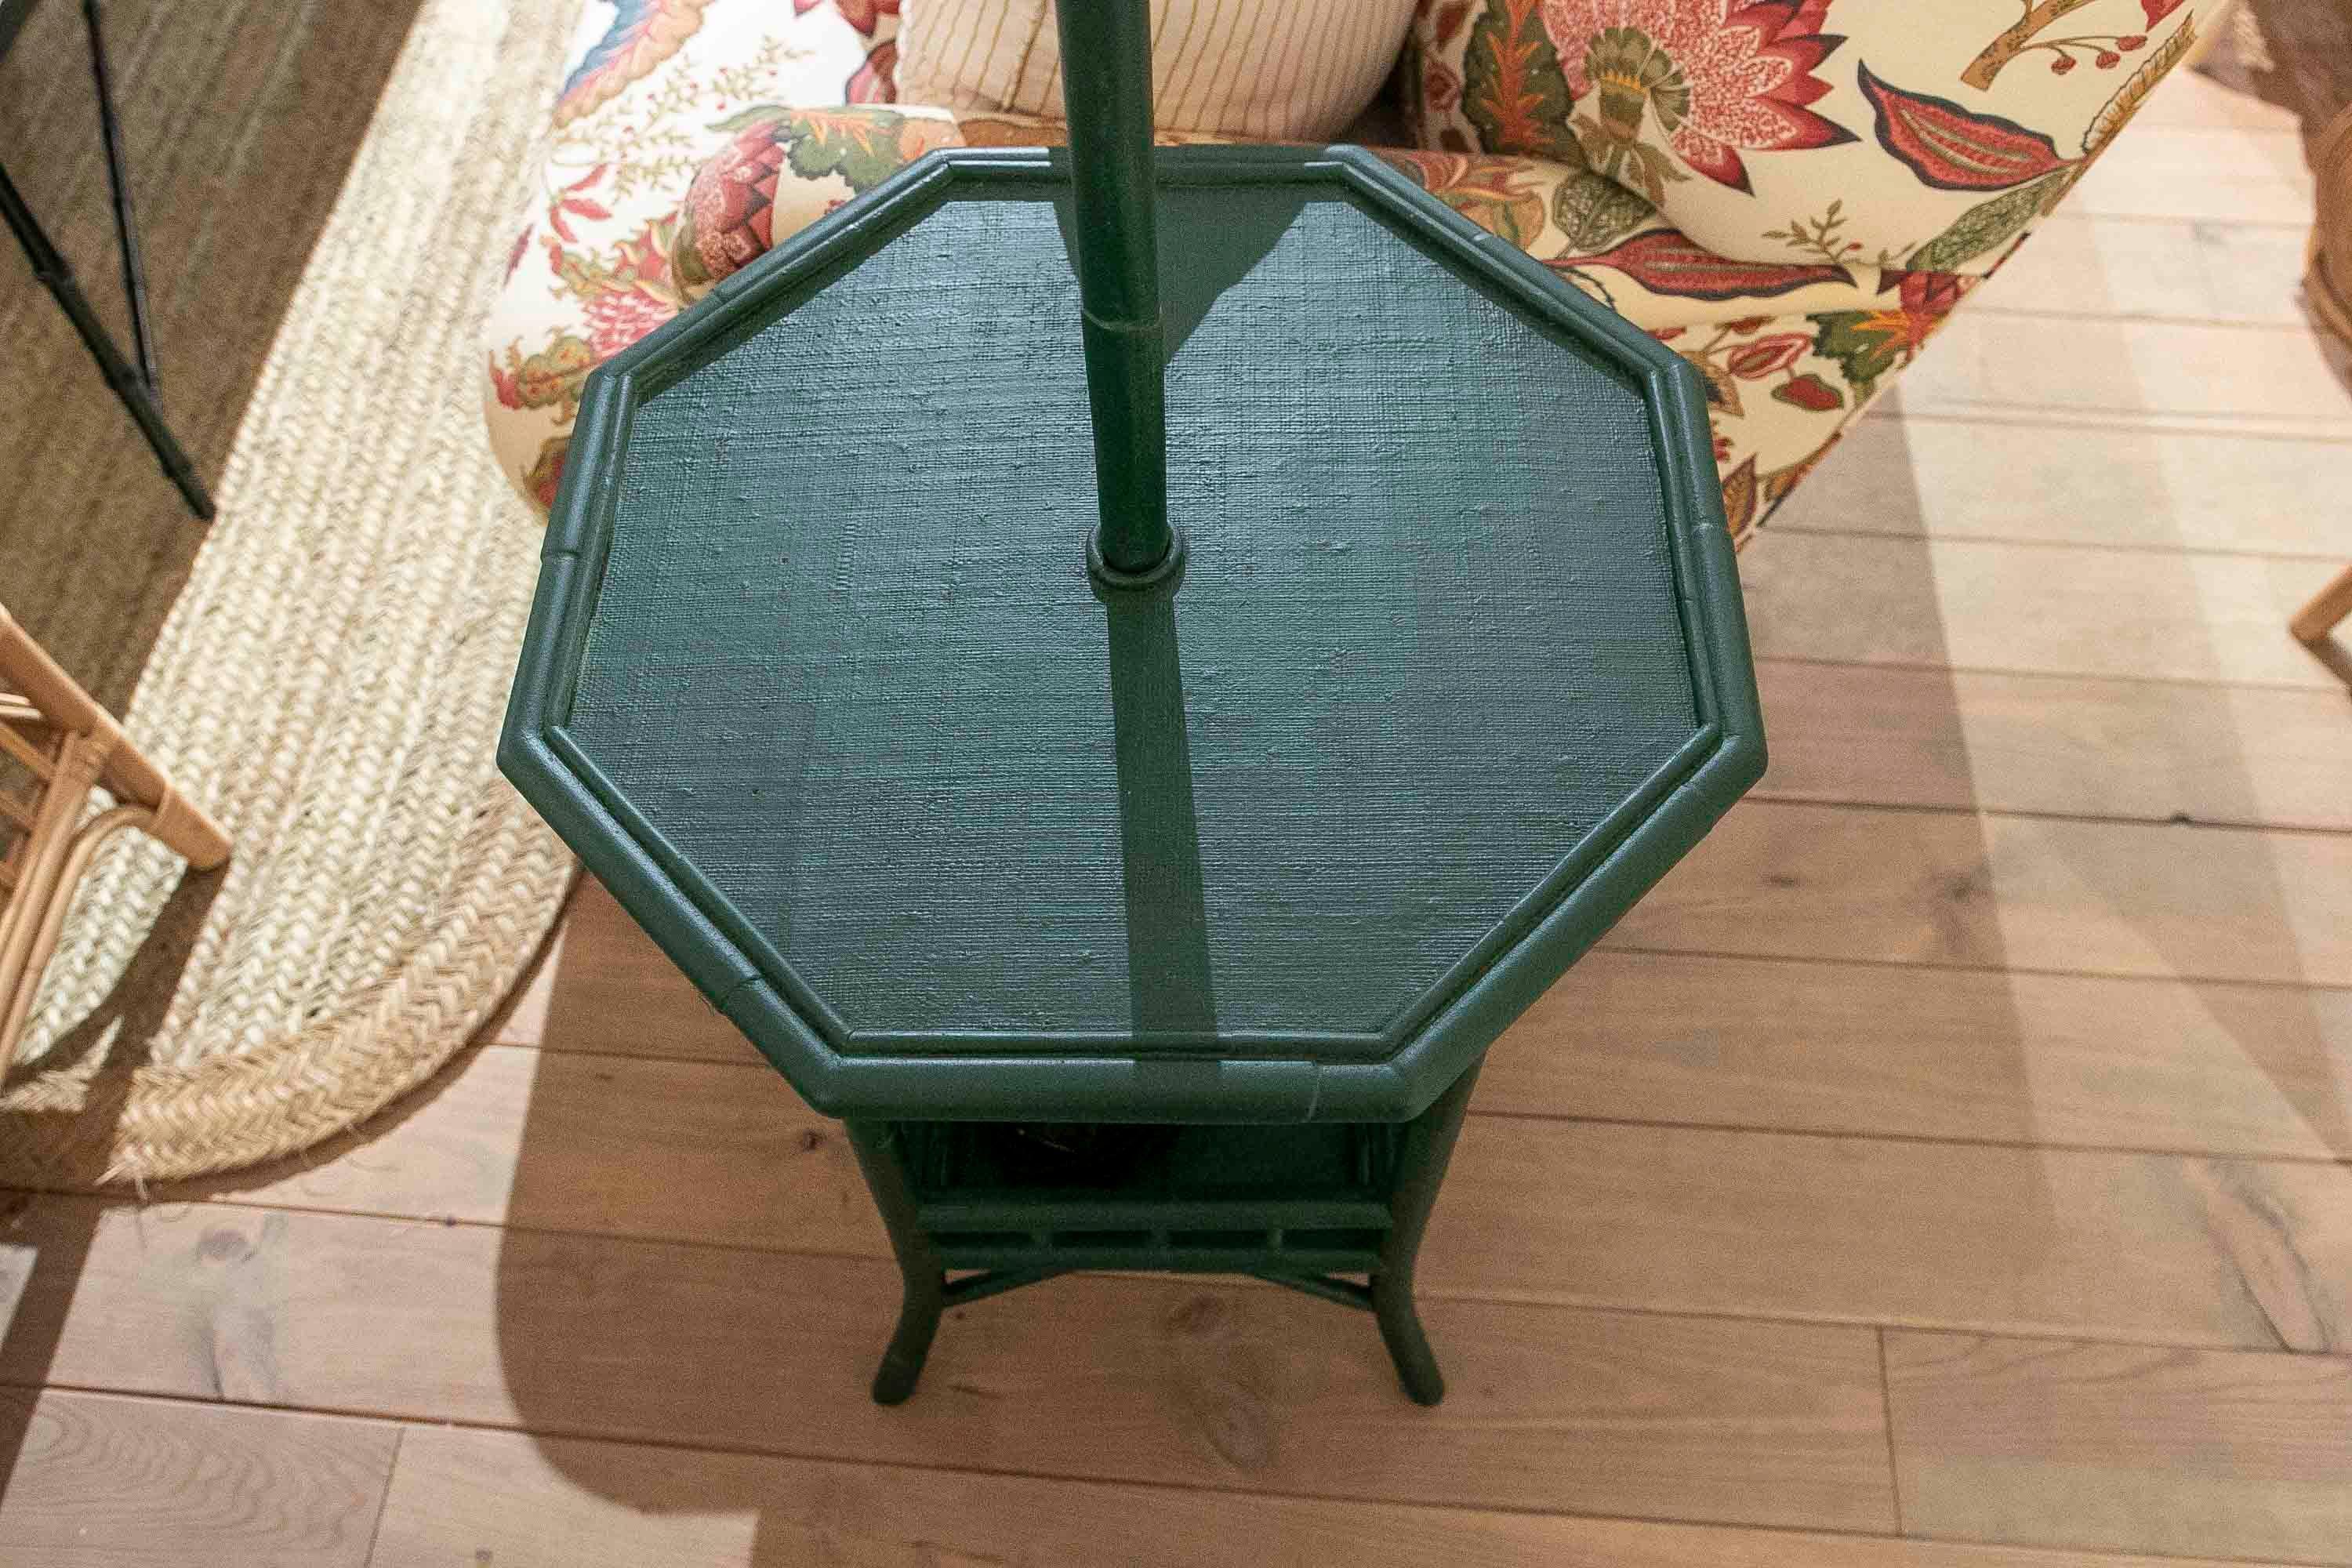 Bamboo and Wicker Floor Lamp with Three Shelves Painted in Green Tones 10